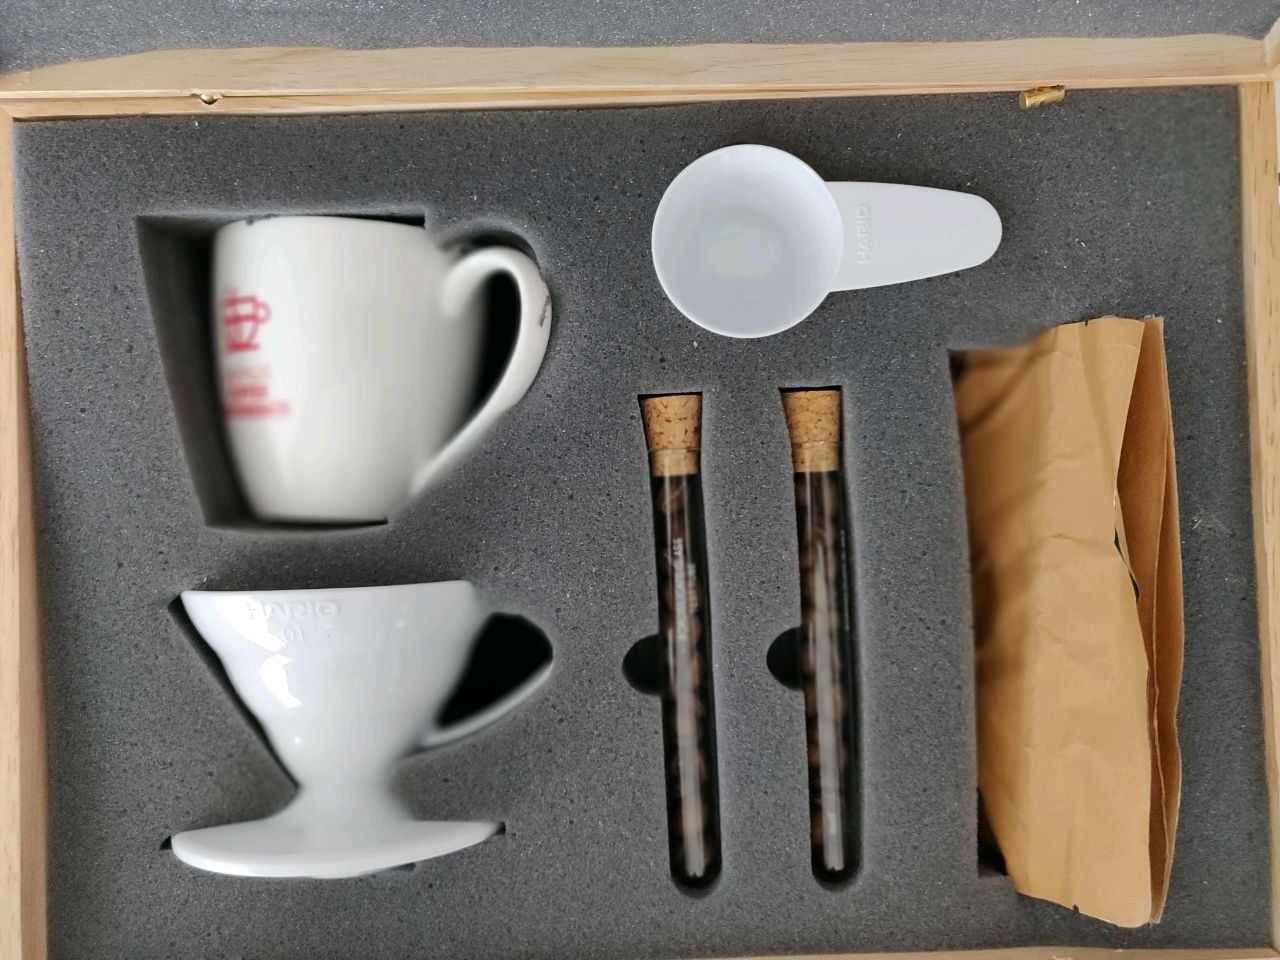 CoffeeBox from OnePlus